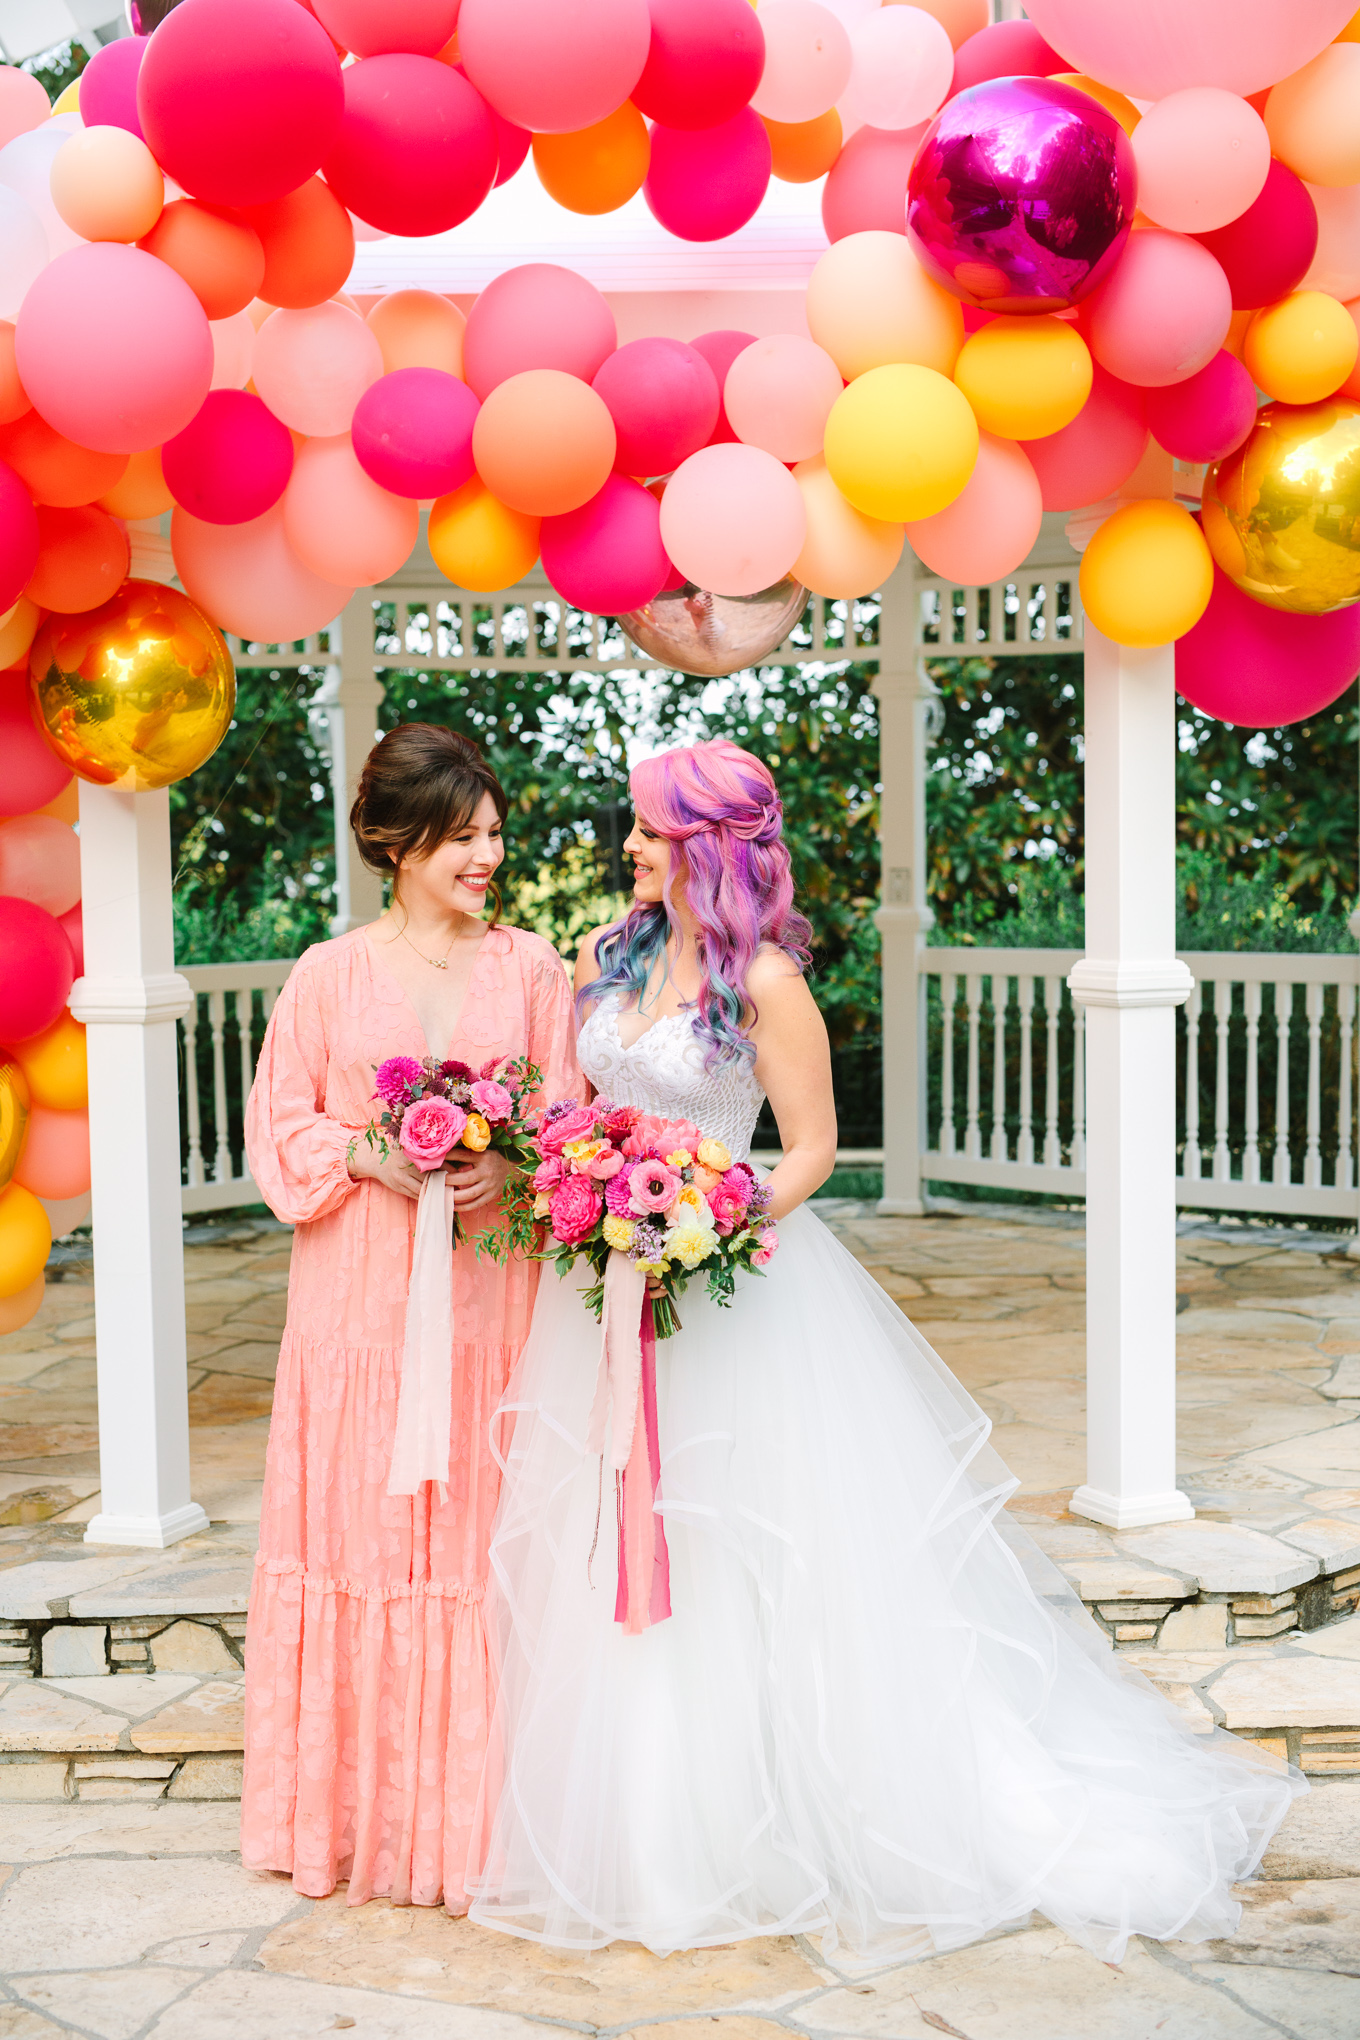 Colorful bouquets with blush bridal gown| Beautiful bridal bouquet inspiration and advice | Colorful and elevated wedding photography for fun-loving couples in Southern California | #weddingflowers #weddingbouquet #bridebouquet #bouquetideas #uniquebouquet   Source: Mary Costa Photography | Los Angeles